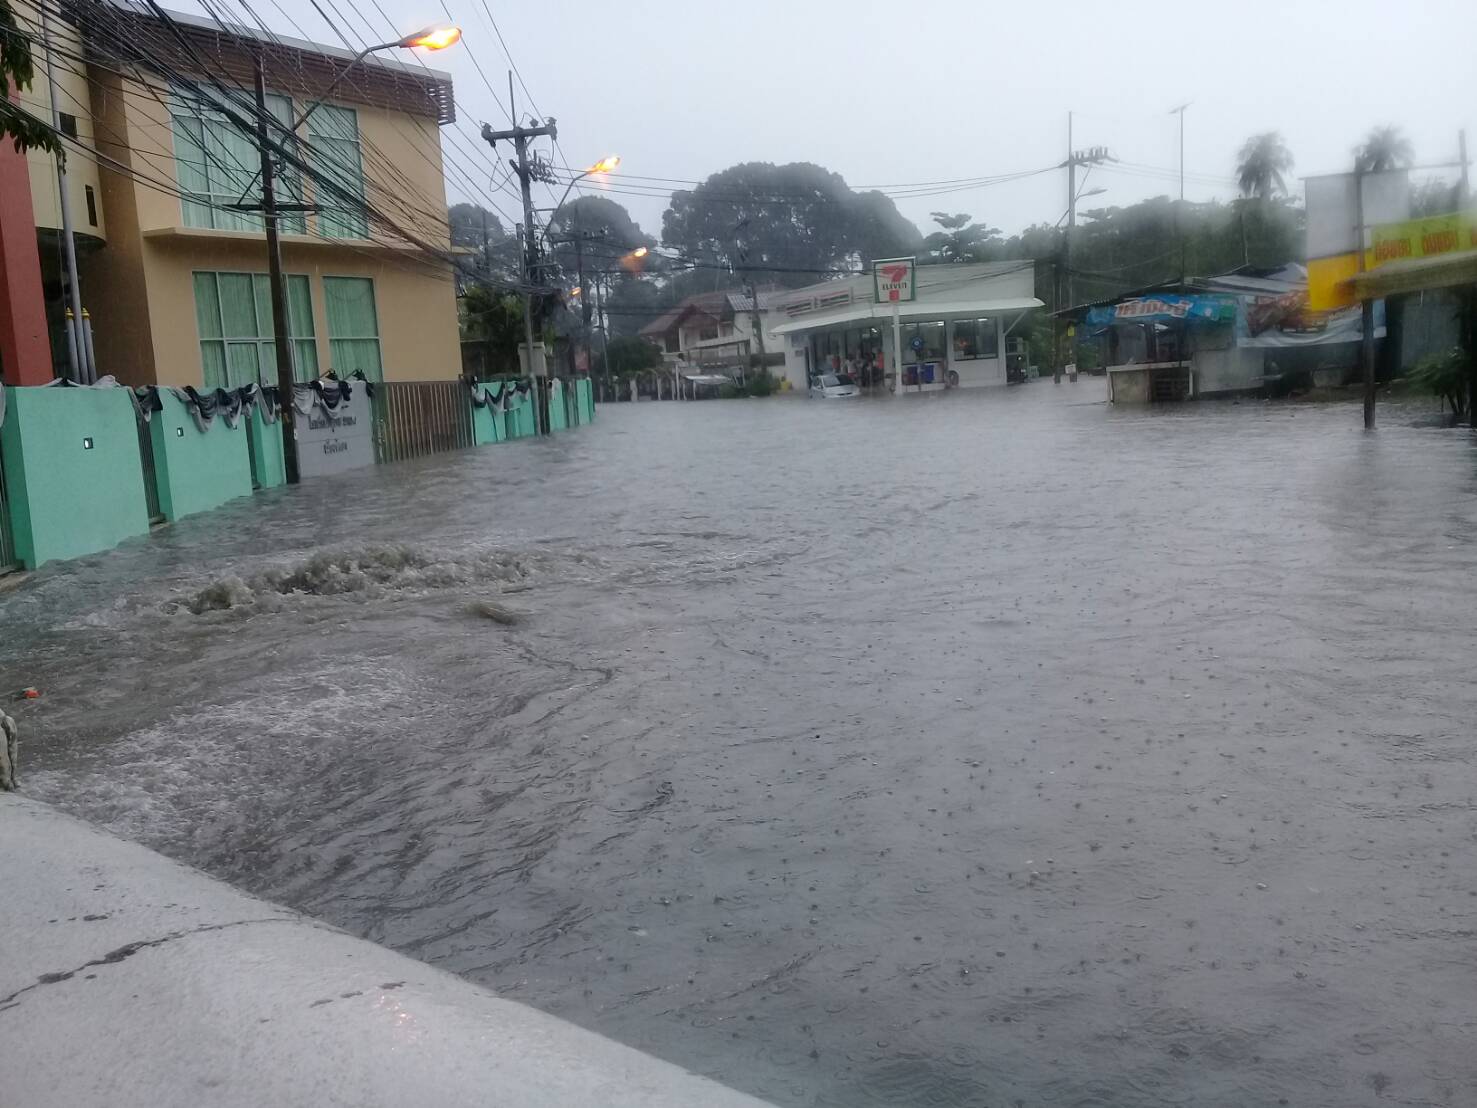 Flooding in the Nongyai area - Pattaya officials said their efforts to dredge canals and clear sewers are paying off as flooding from an April 1 storm drained in as little as 27 minutes.